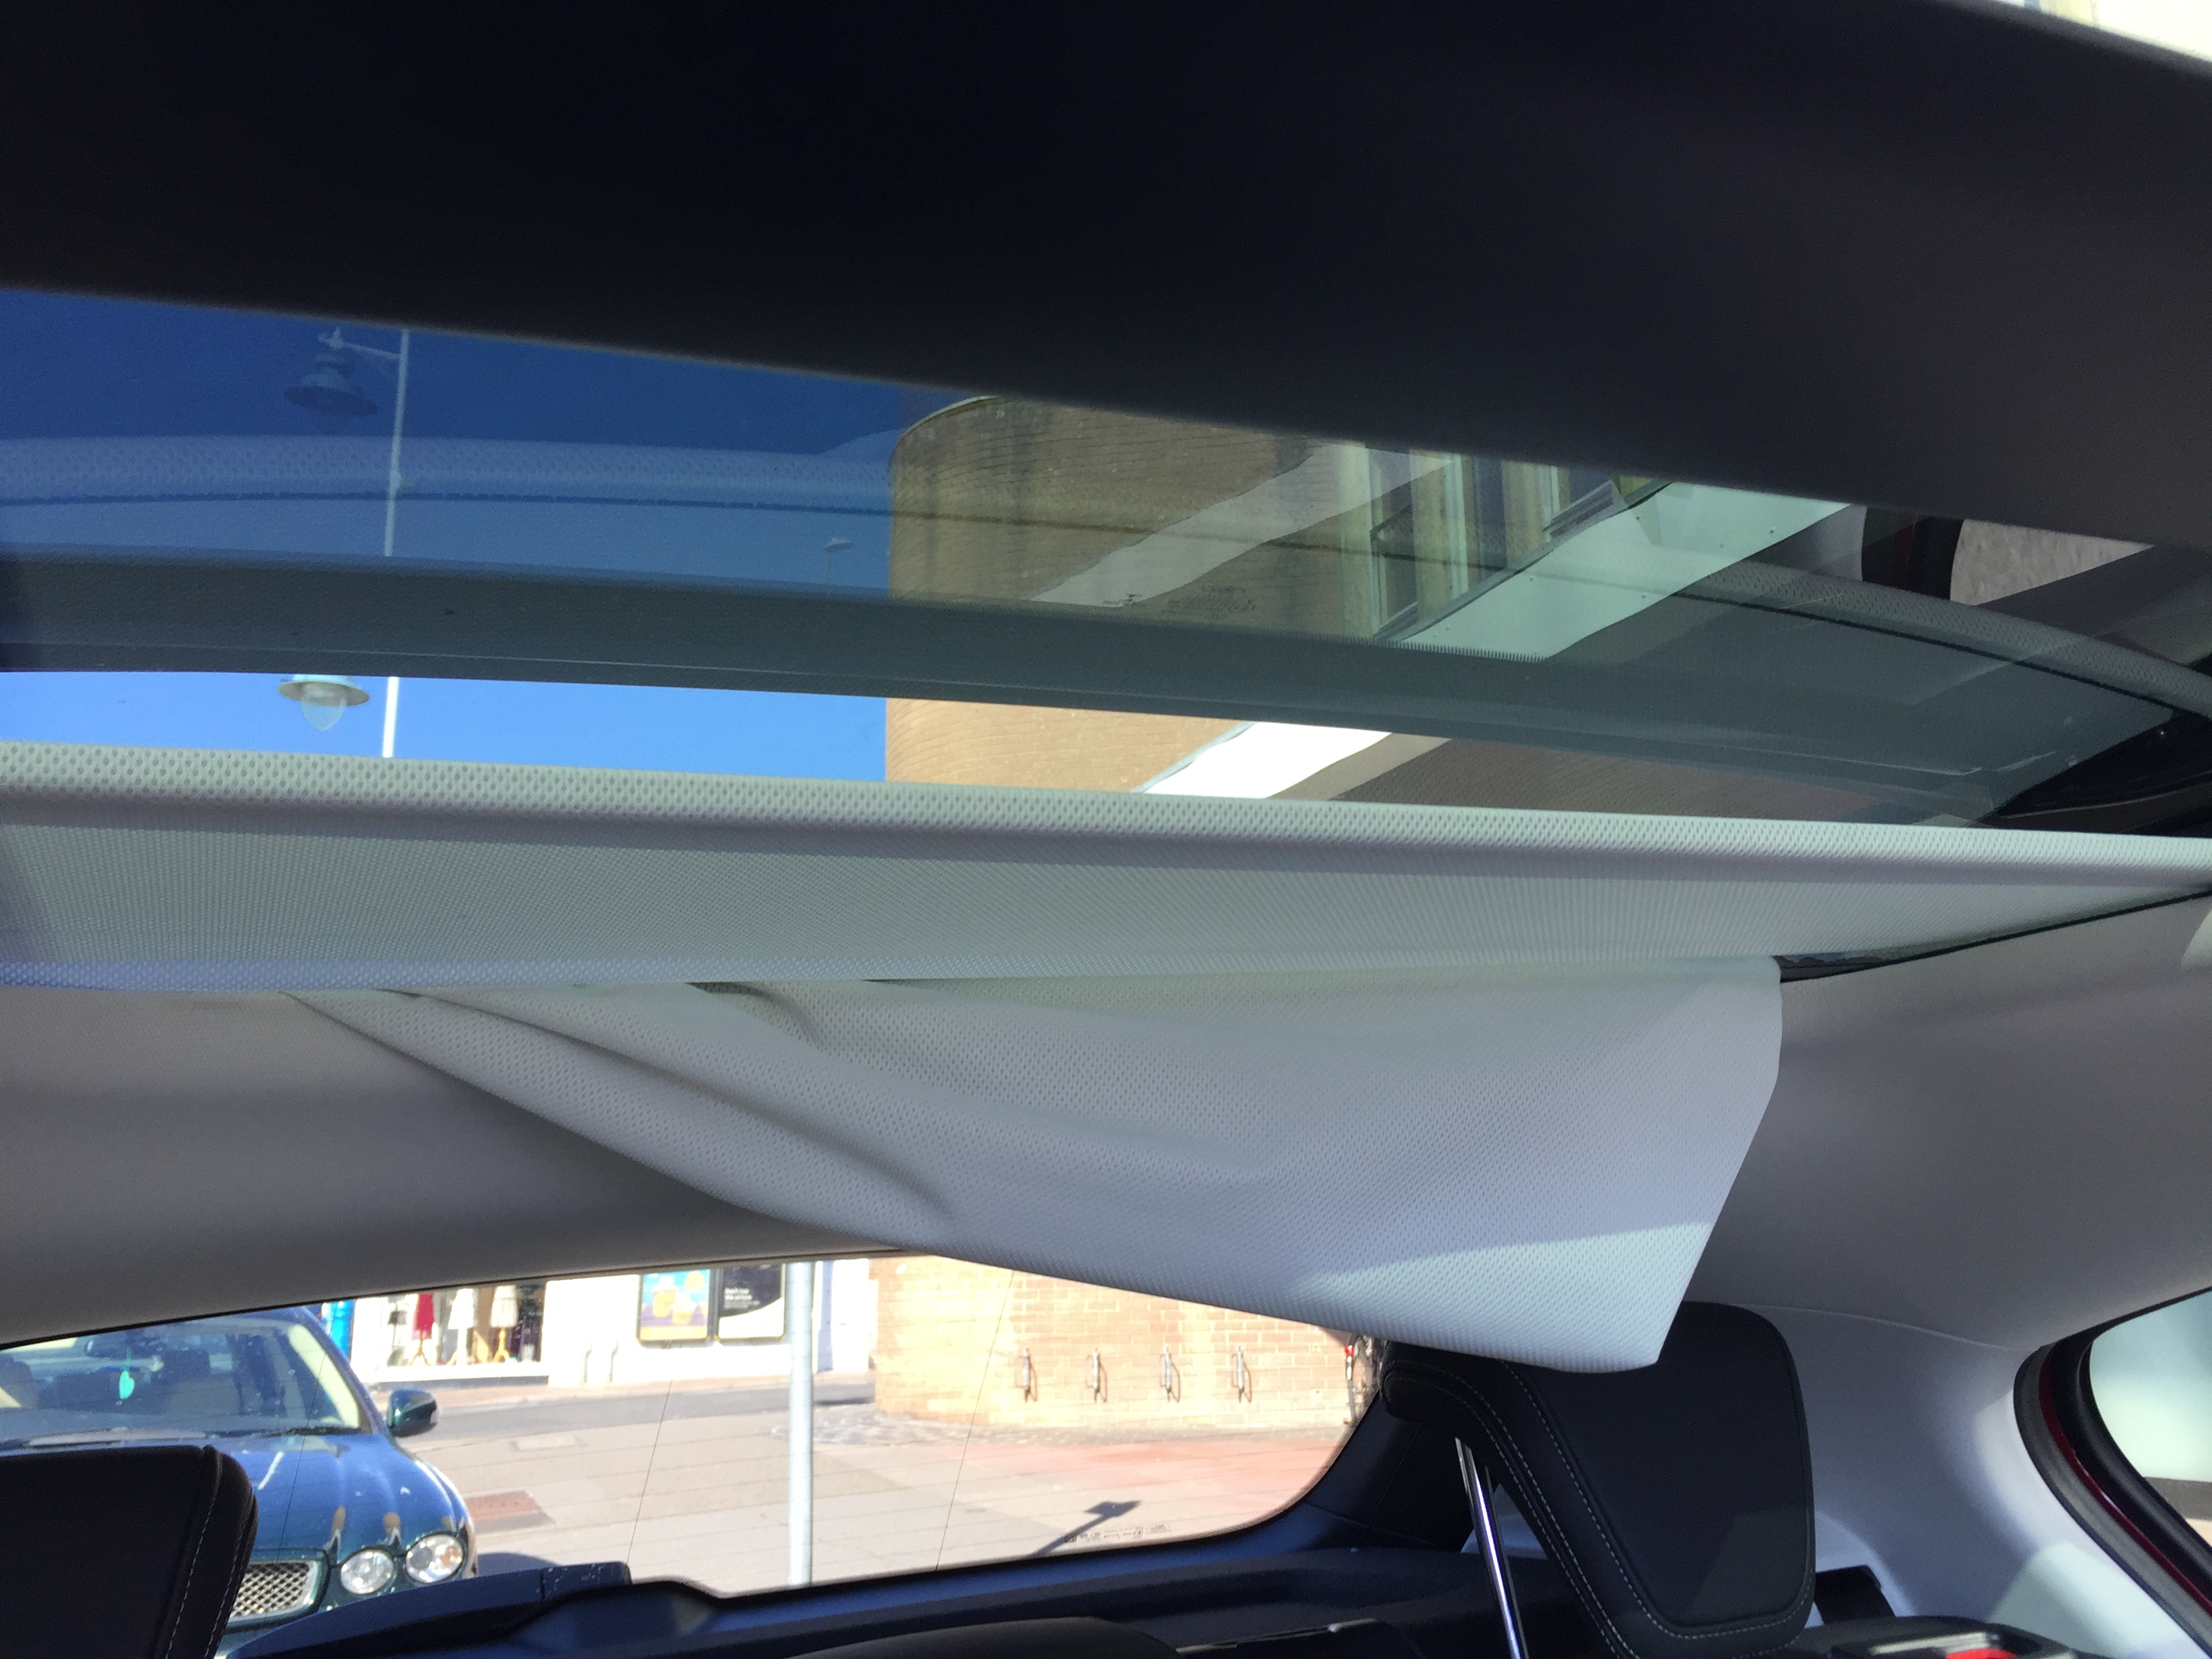 The Ford's sunroof failed to retract properly on one occasion